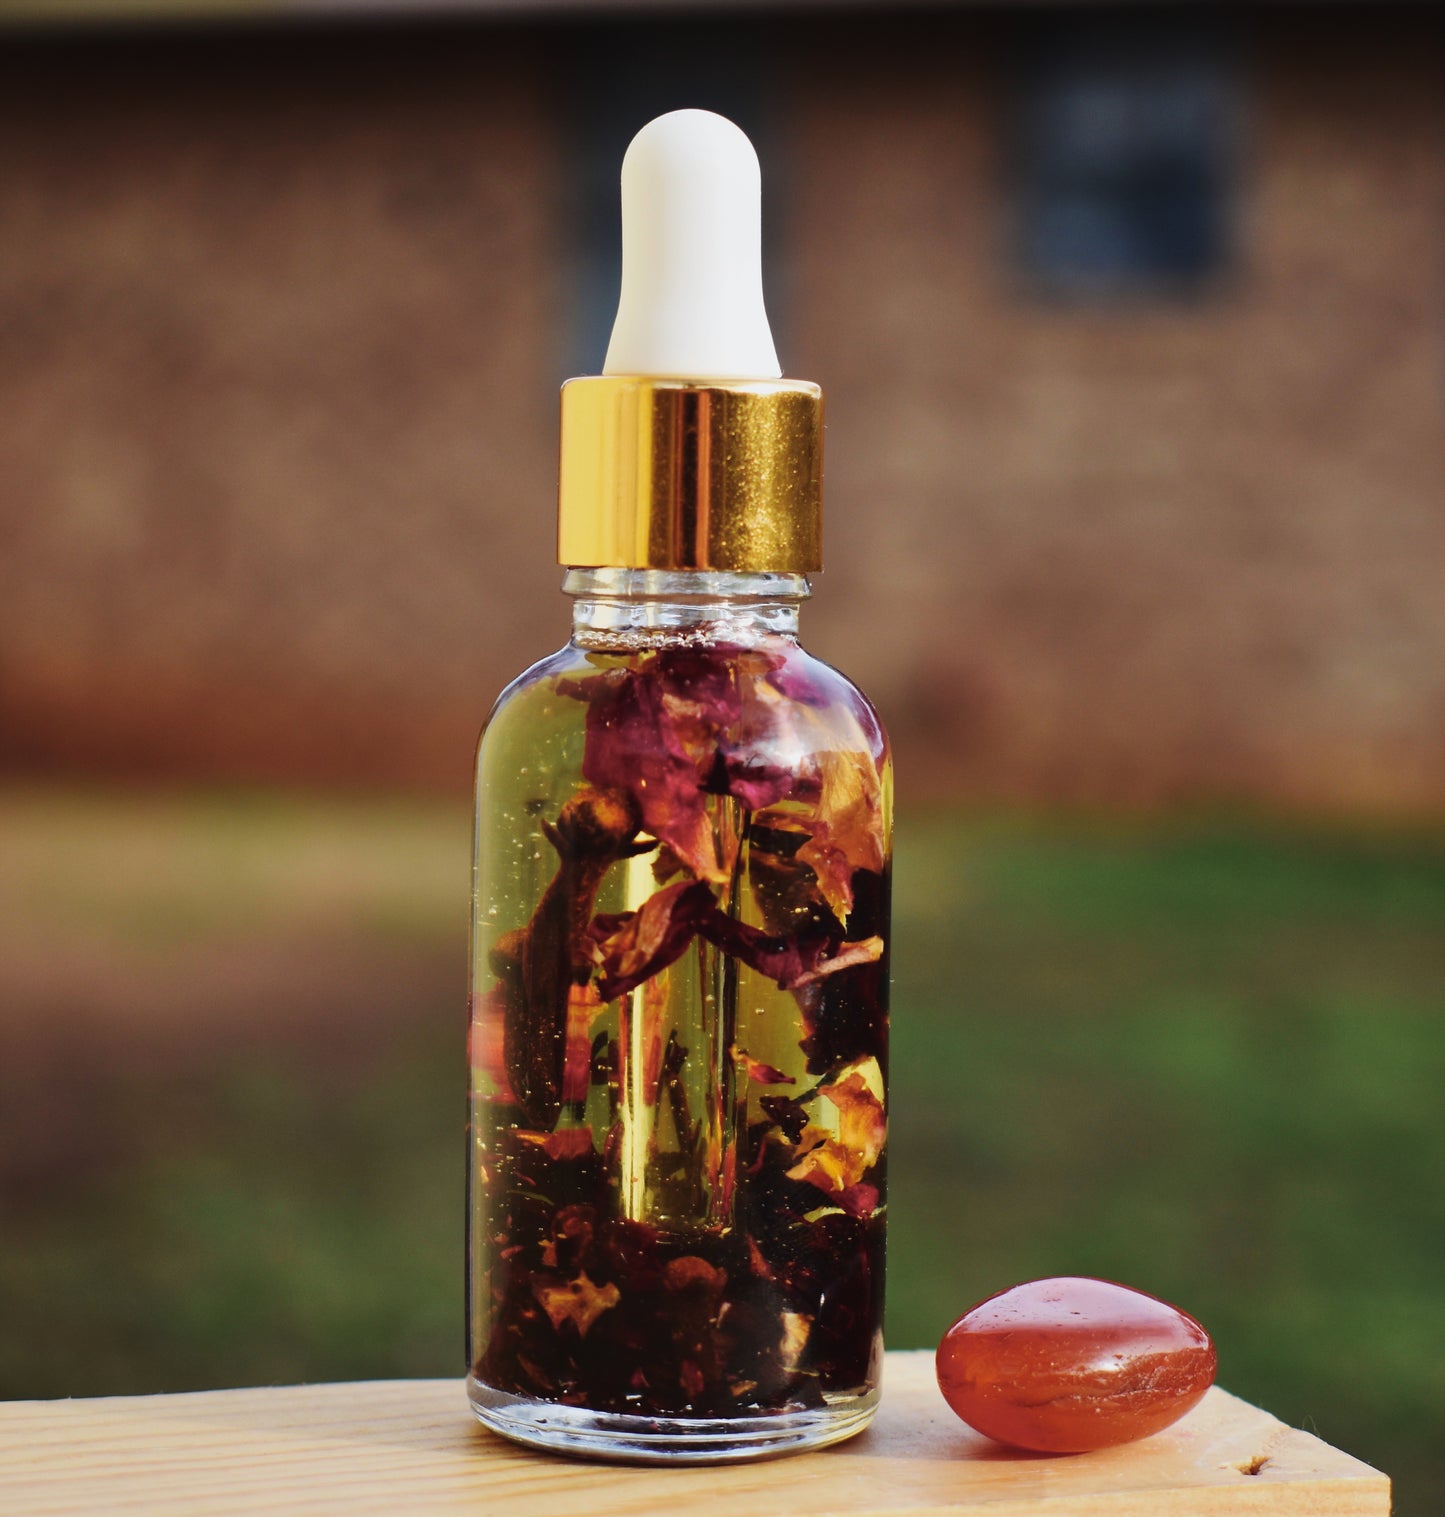 Musk Oil - Aromatherapy, Spell, Ritual Potions, Attraction, Lust